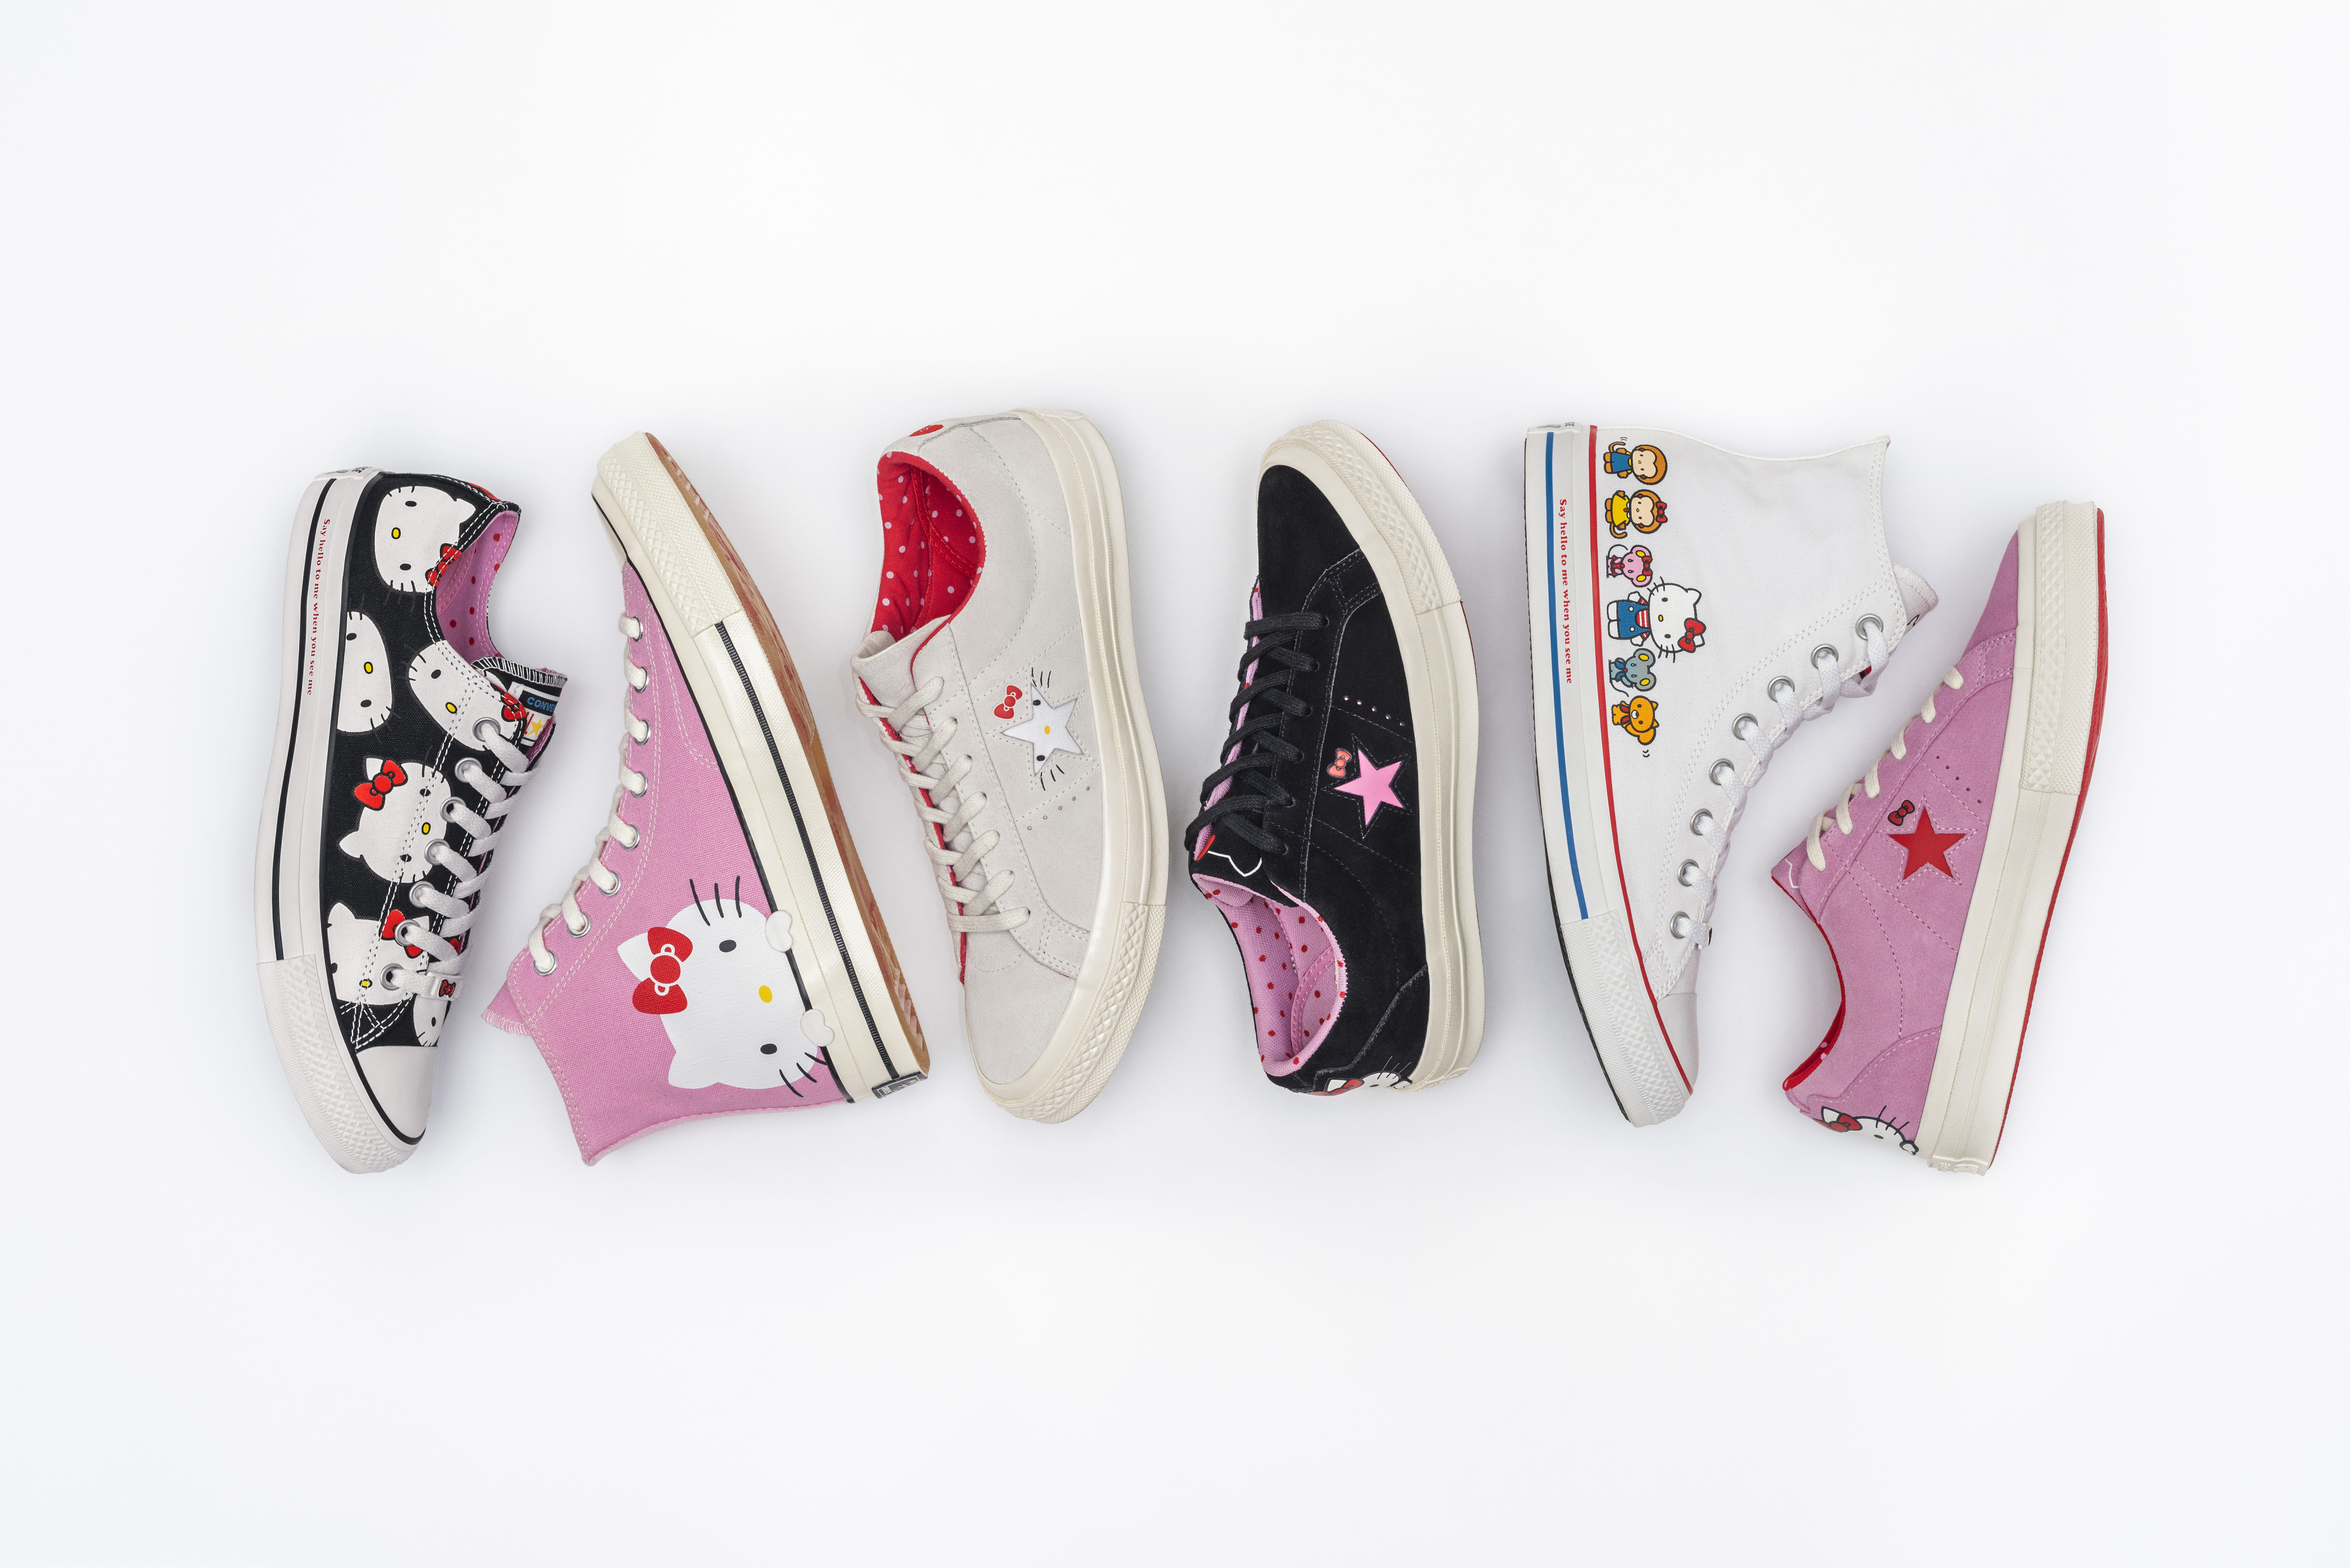 Sanrio and Converse Team Up on Iconic Hello Kitty JAPAN